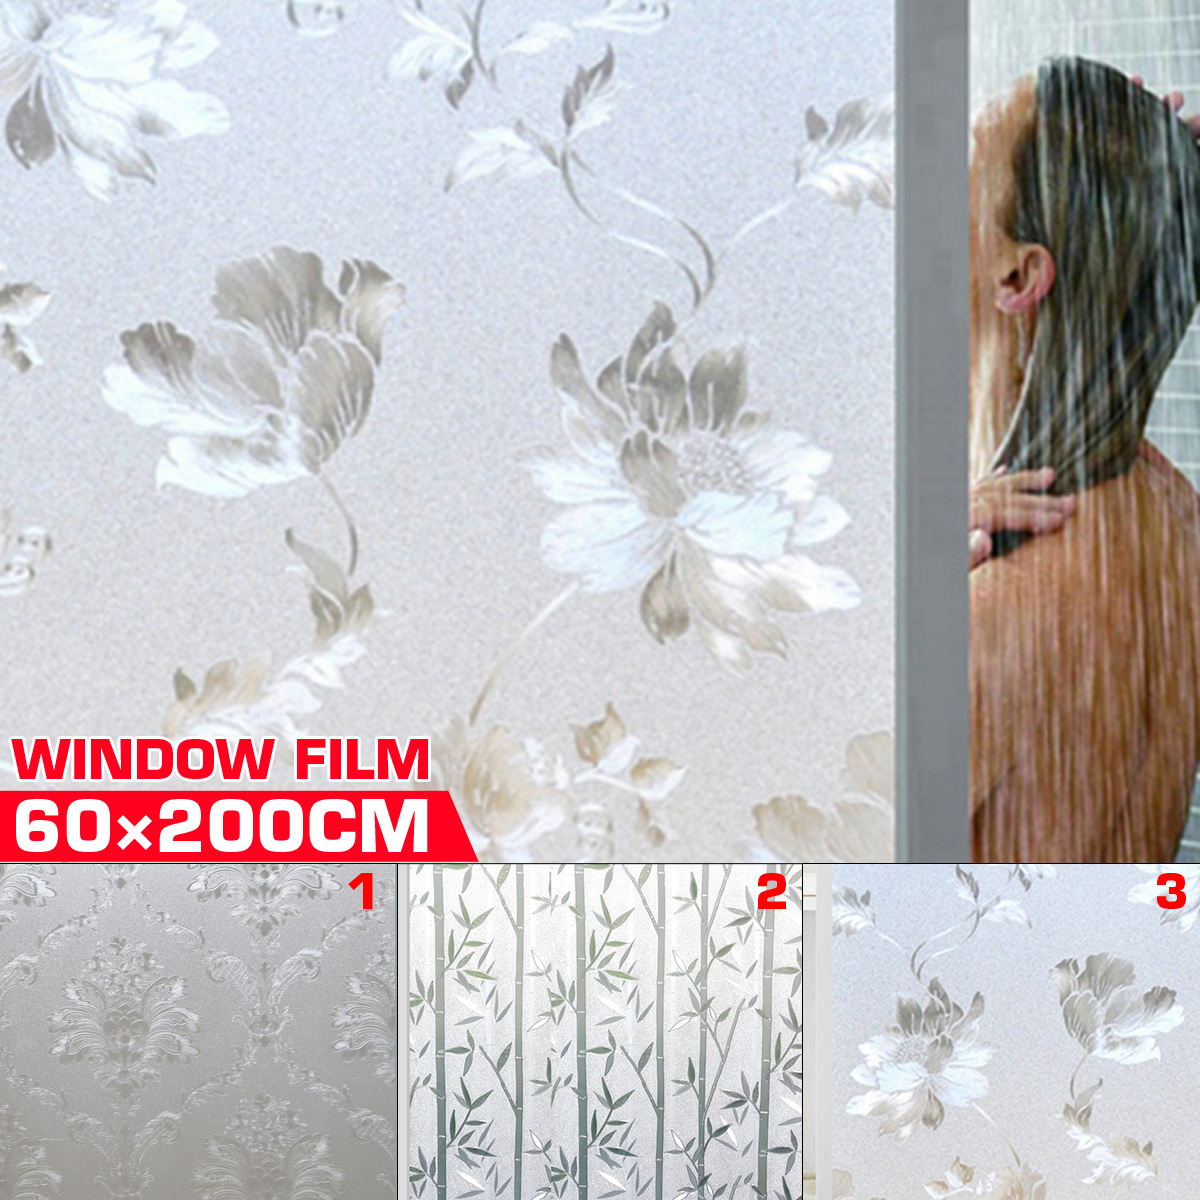 60-x-200cm-Waterproof-PVC-Frosted-Glass-Window-Film-Cover-Window-Privacy-Bedroom-Bathroom-Self-Adhes-1807465-1